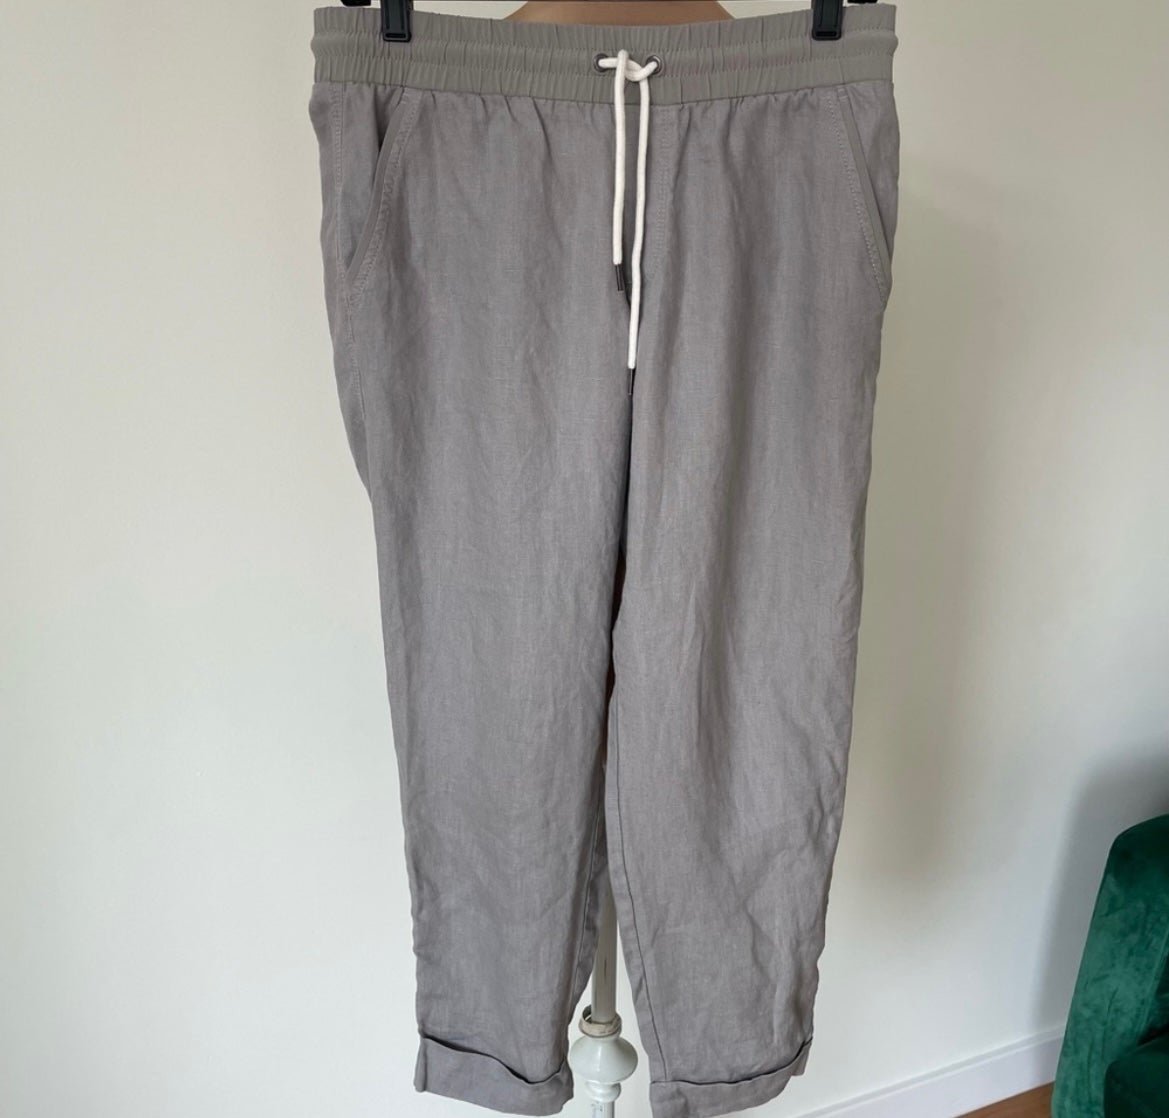 high discount Athleta Gray Bali Linen Mid Rise Tapered Ankle Pant #175799 EUC Size 6 fJCKFSTVX outlet online shop